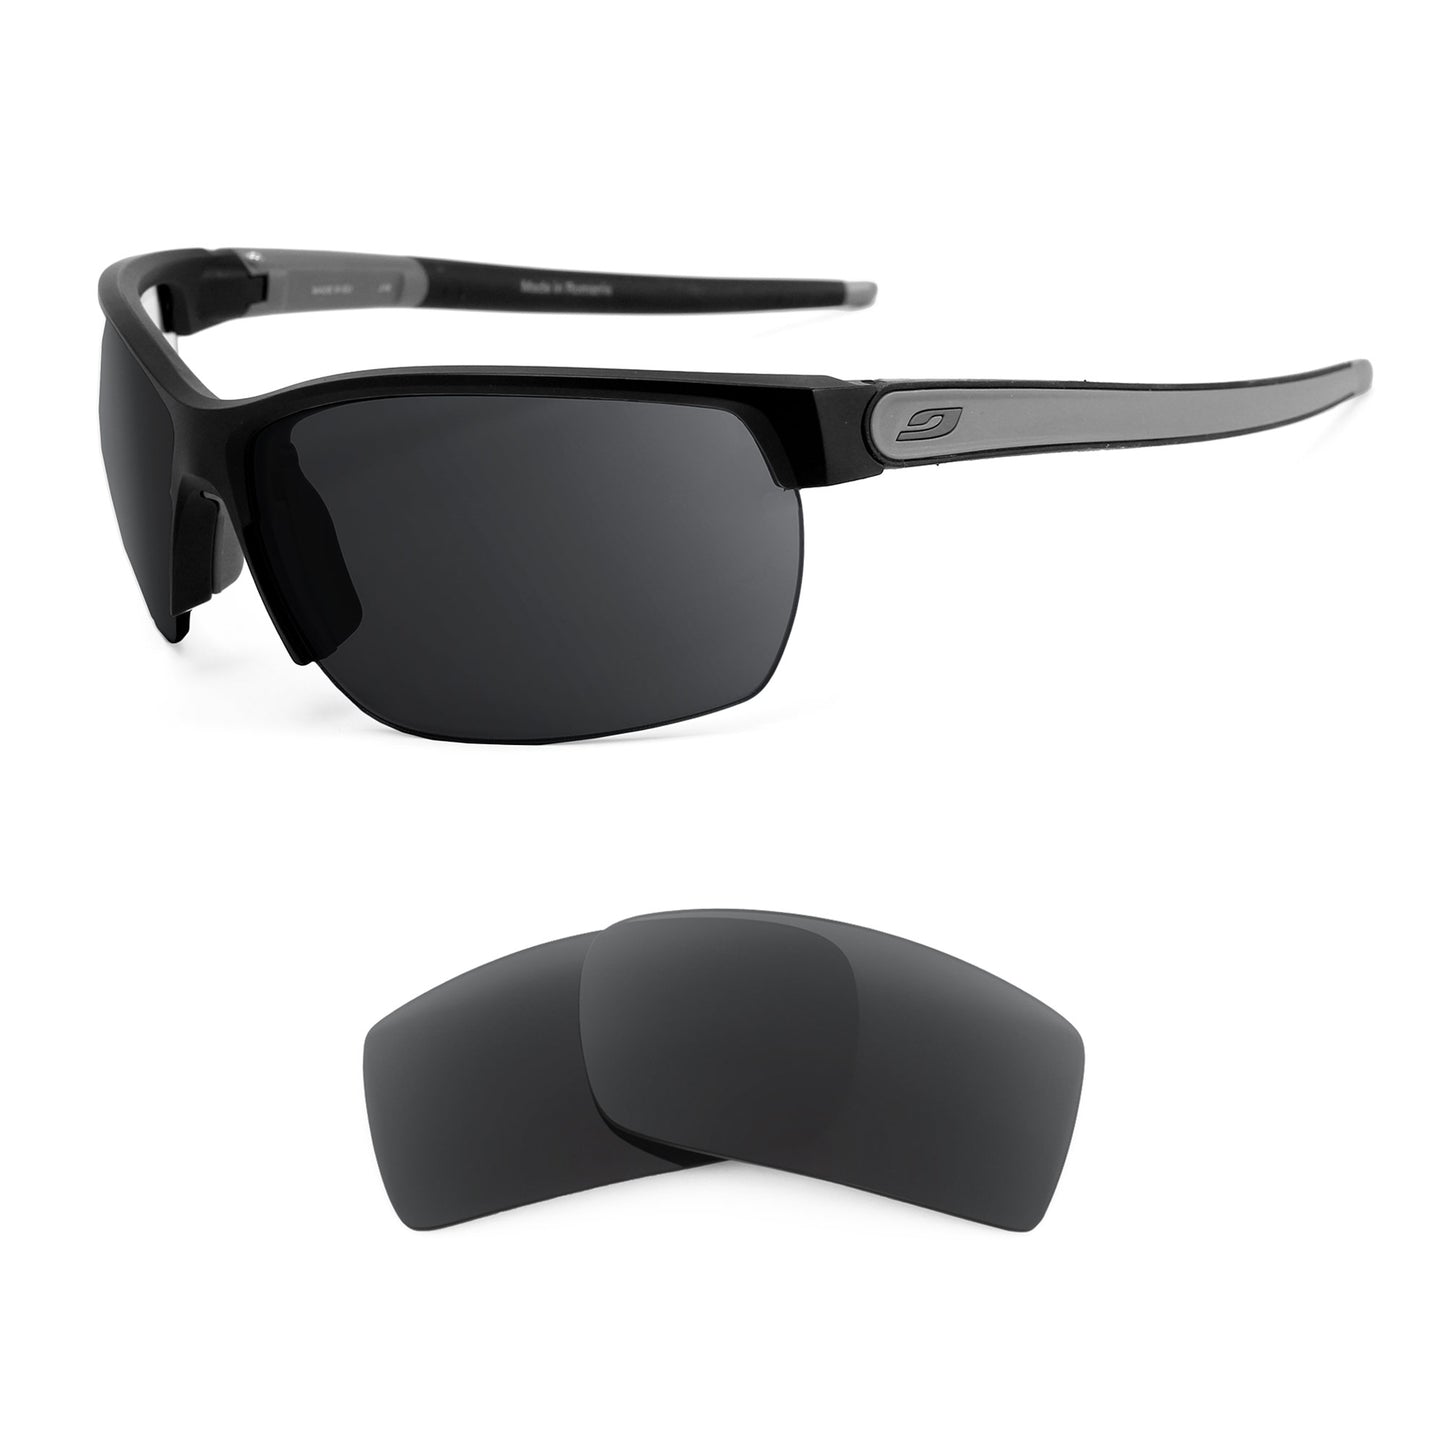 Julbo Zephyr sunglasses with replacement lenses